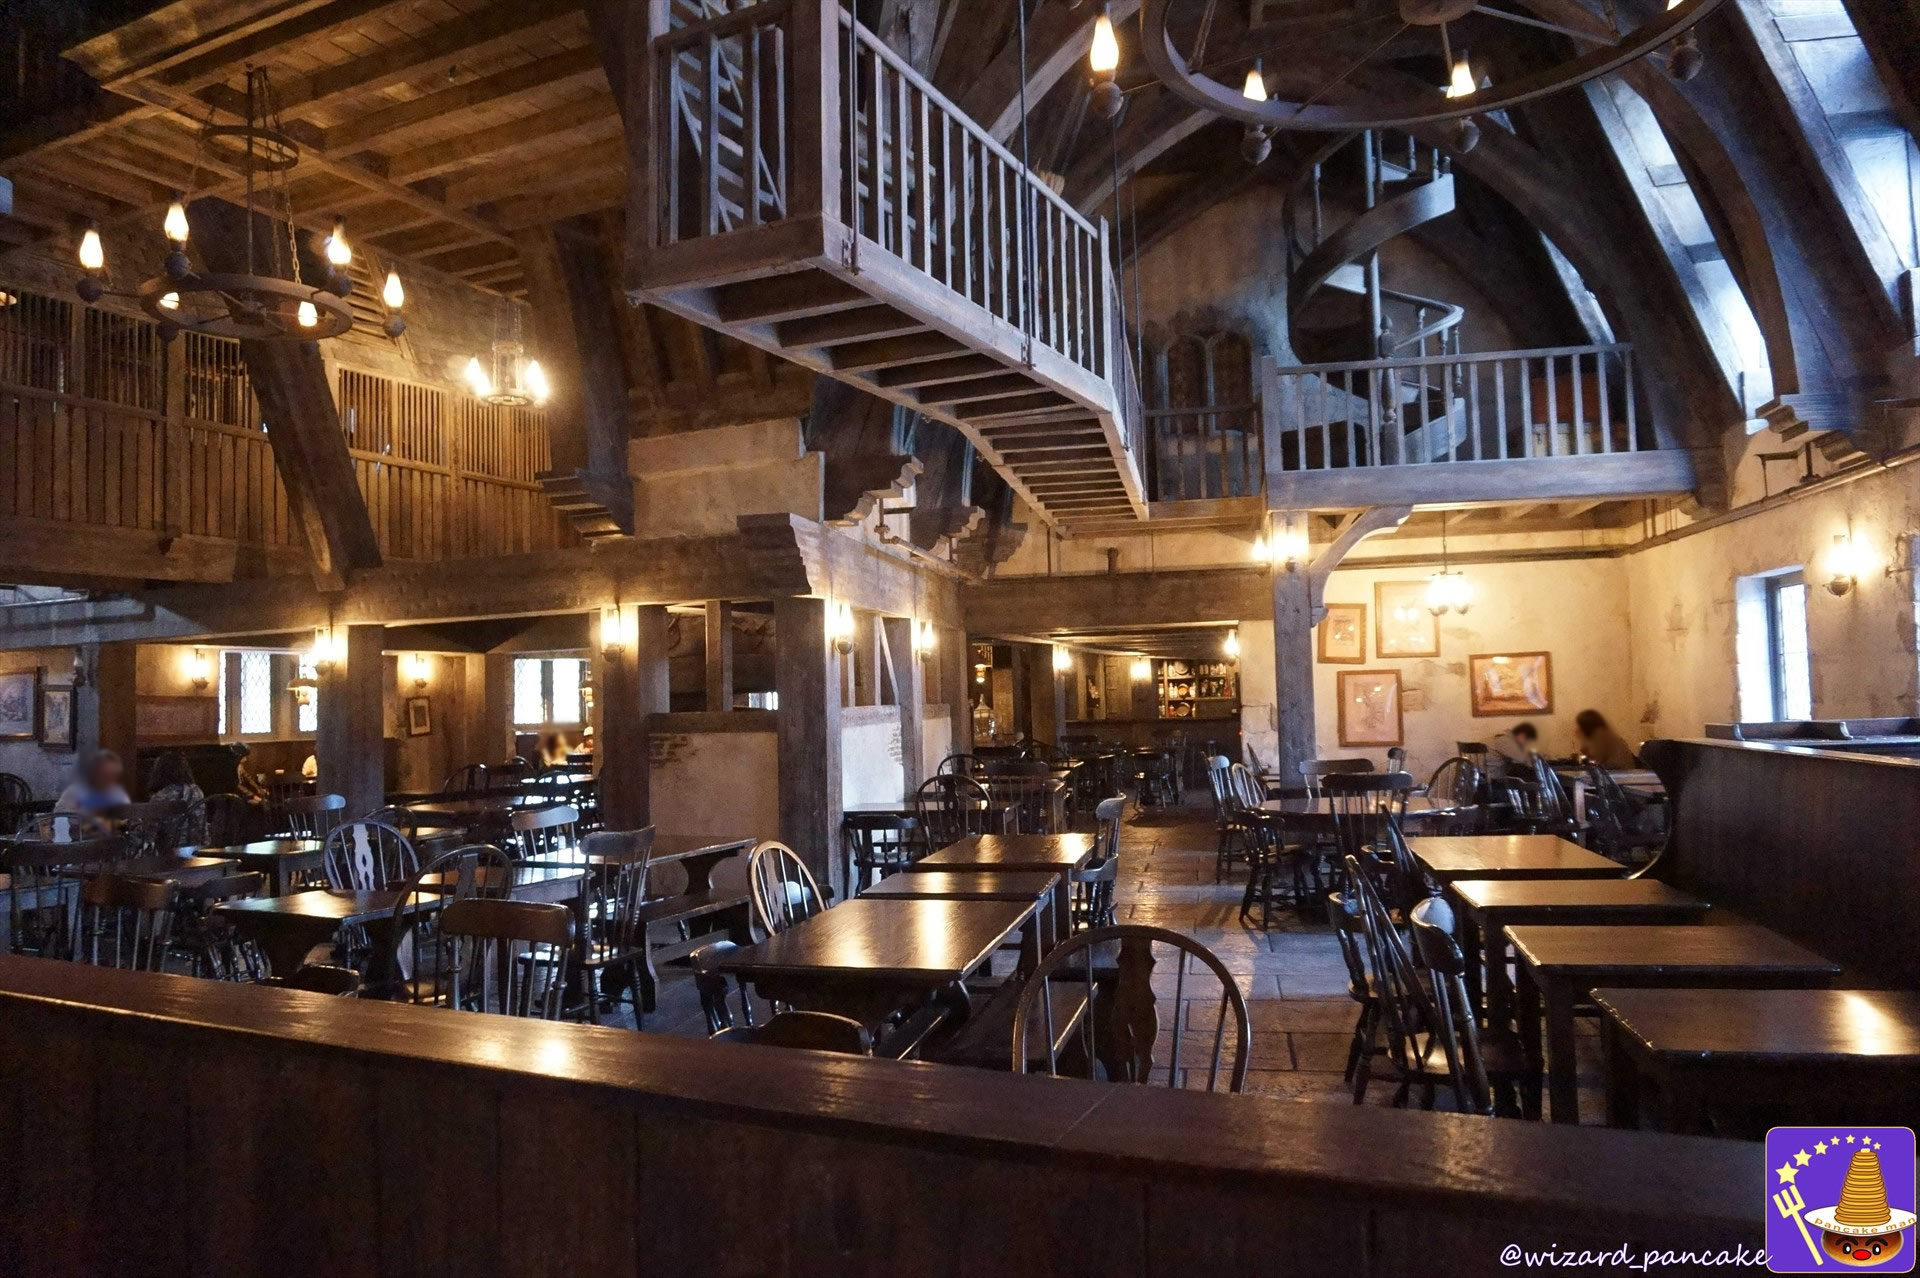 Three Broomsticks Restaurant Pictures of the interior of the Three Broomsticks restaurant (USJ Harry Potter area).